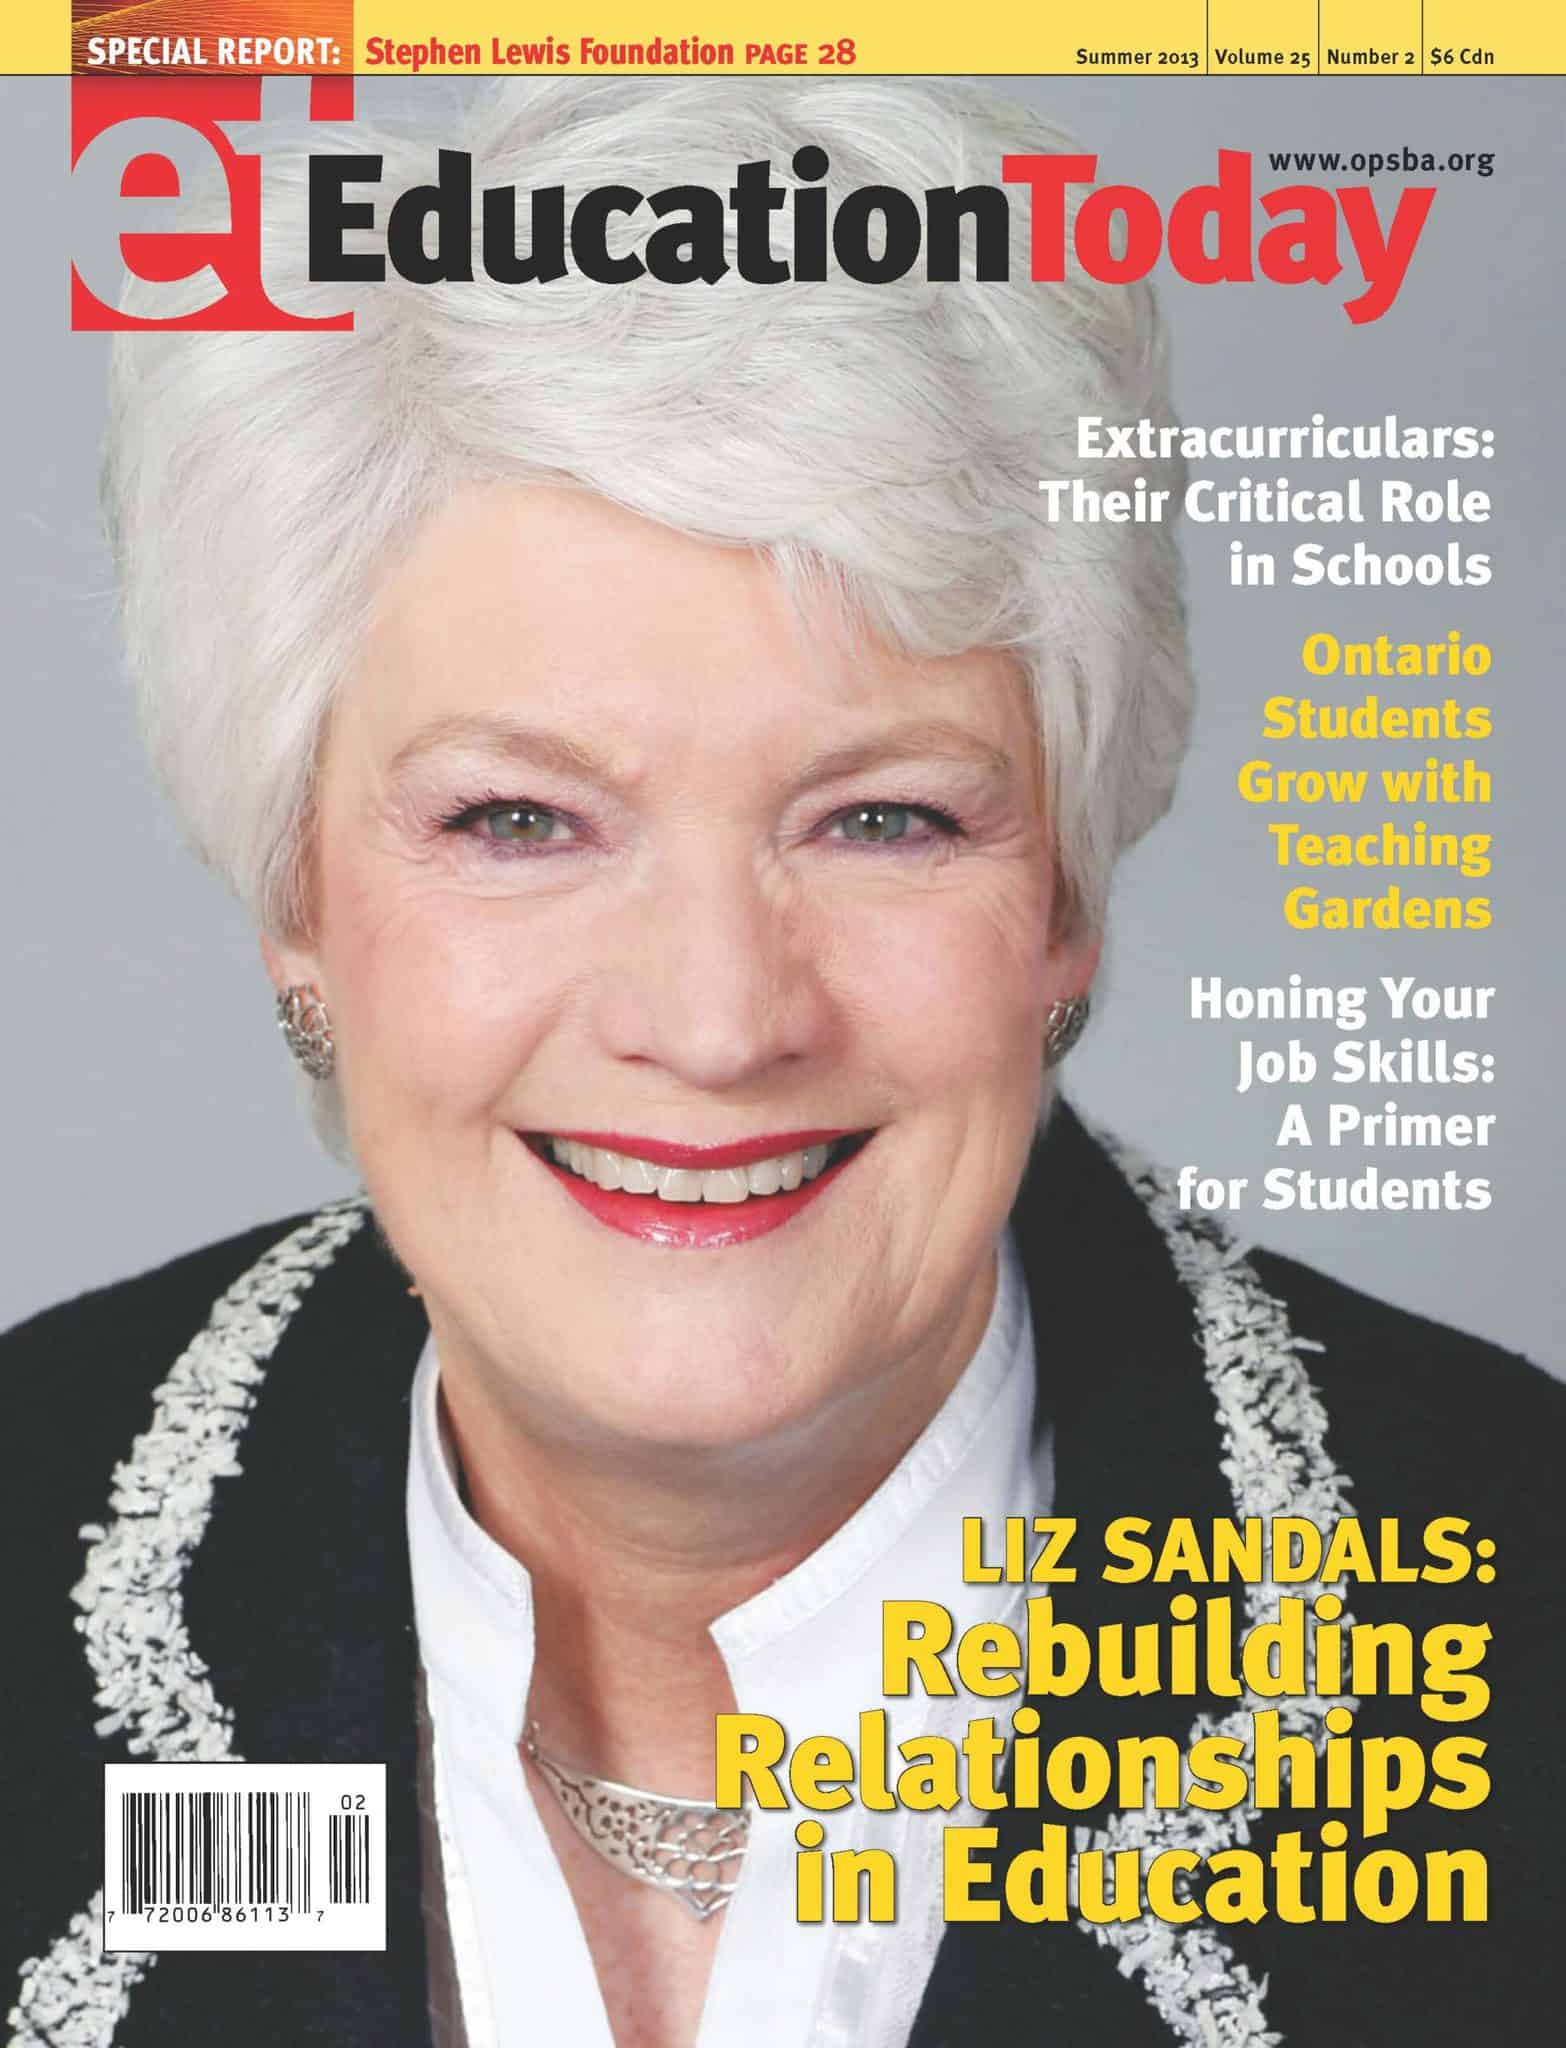 Education Today | Summer 2013 | Volume 25 Number 2